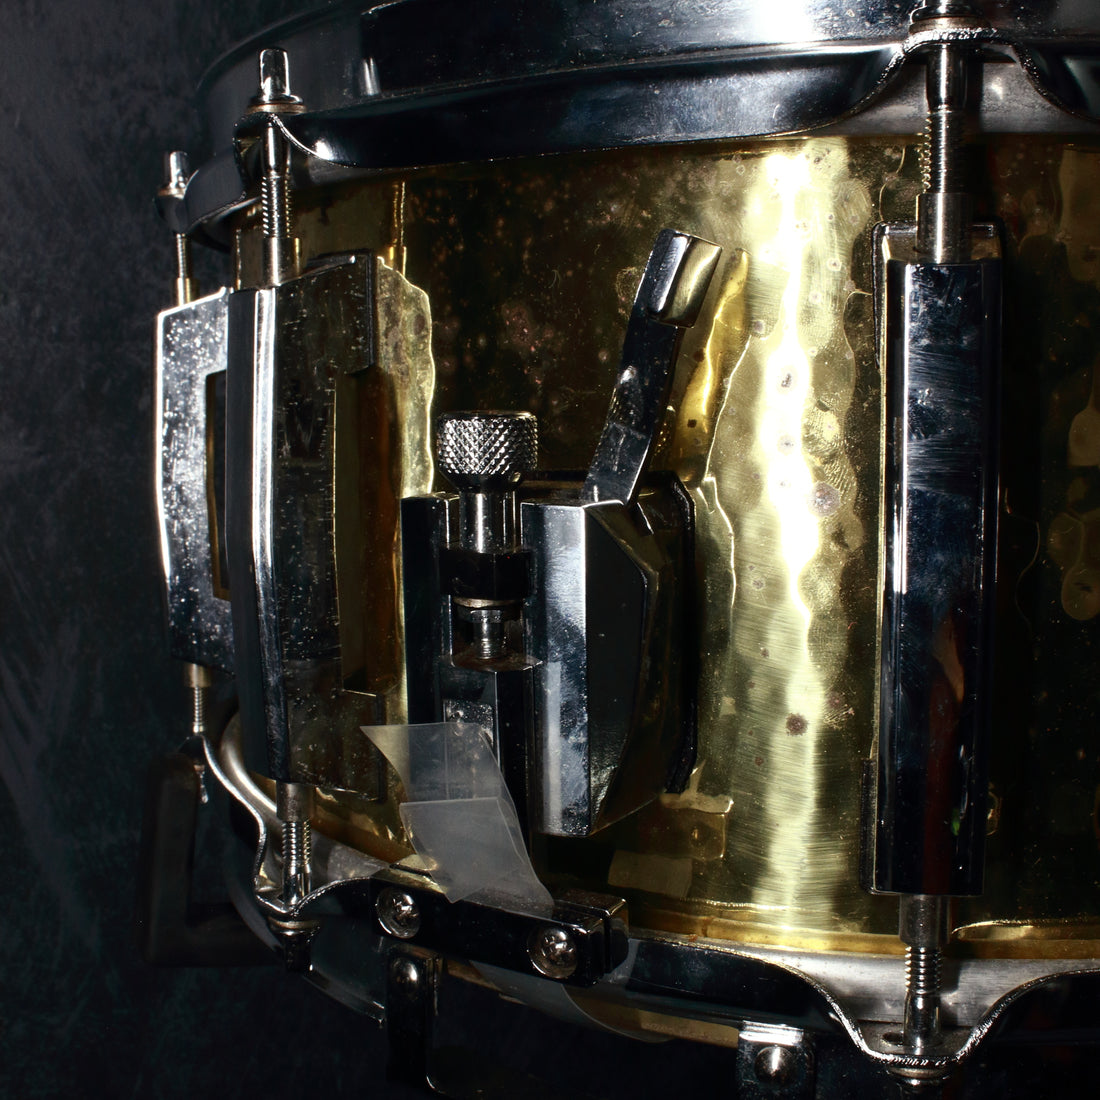 Pearl Hammered Brass Shell snare drum, made in Japan, ser. no. 491108, with  14 head and 6 shell